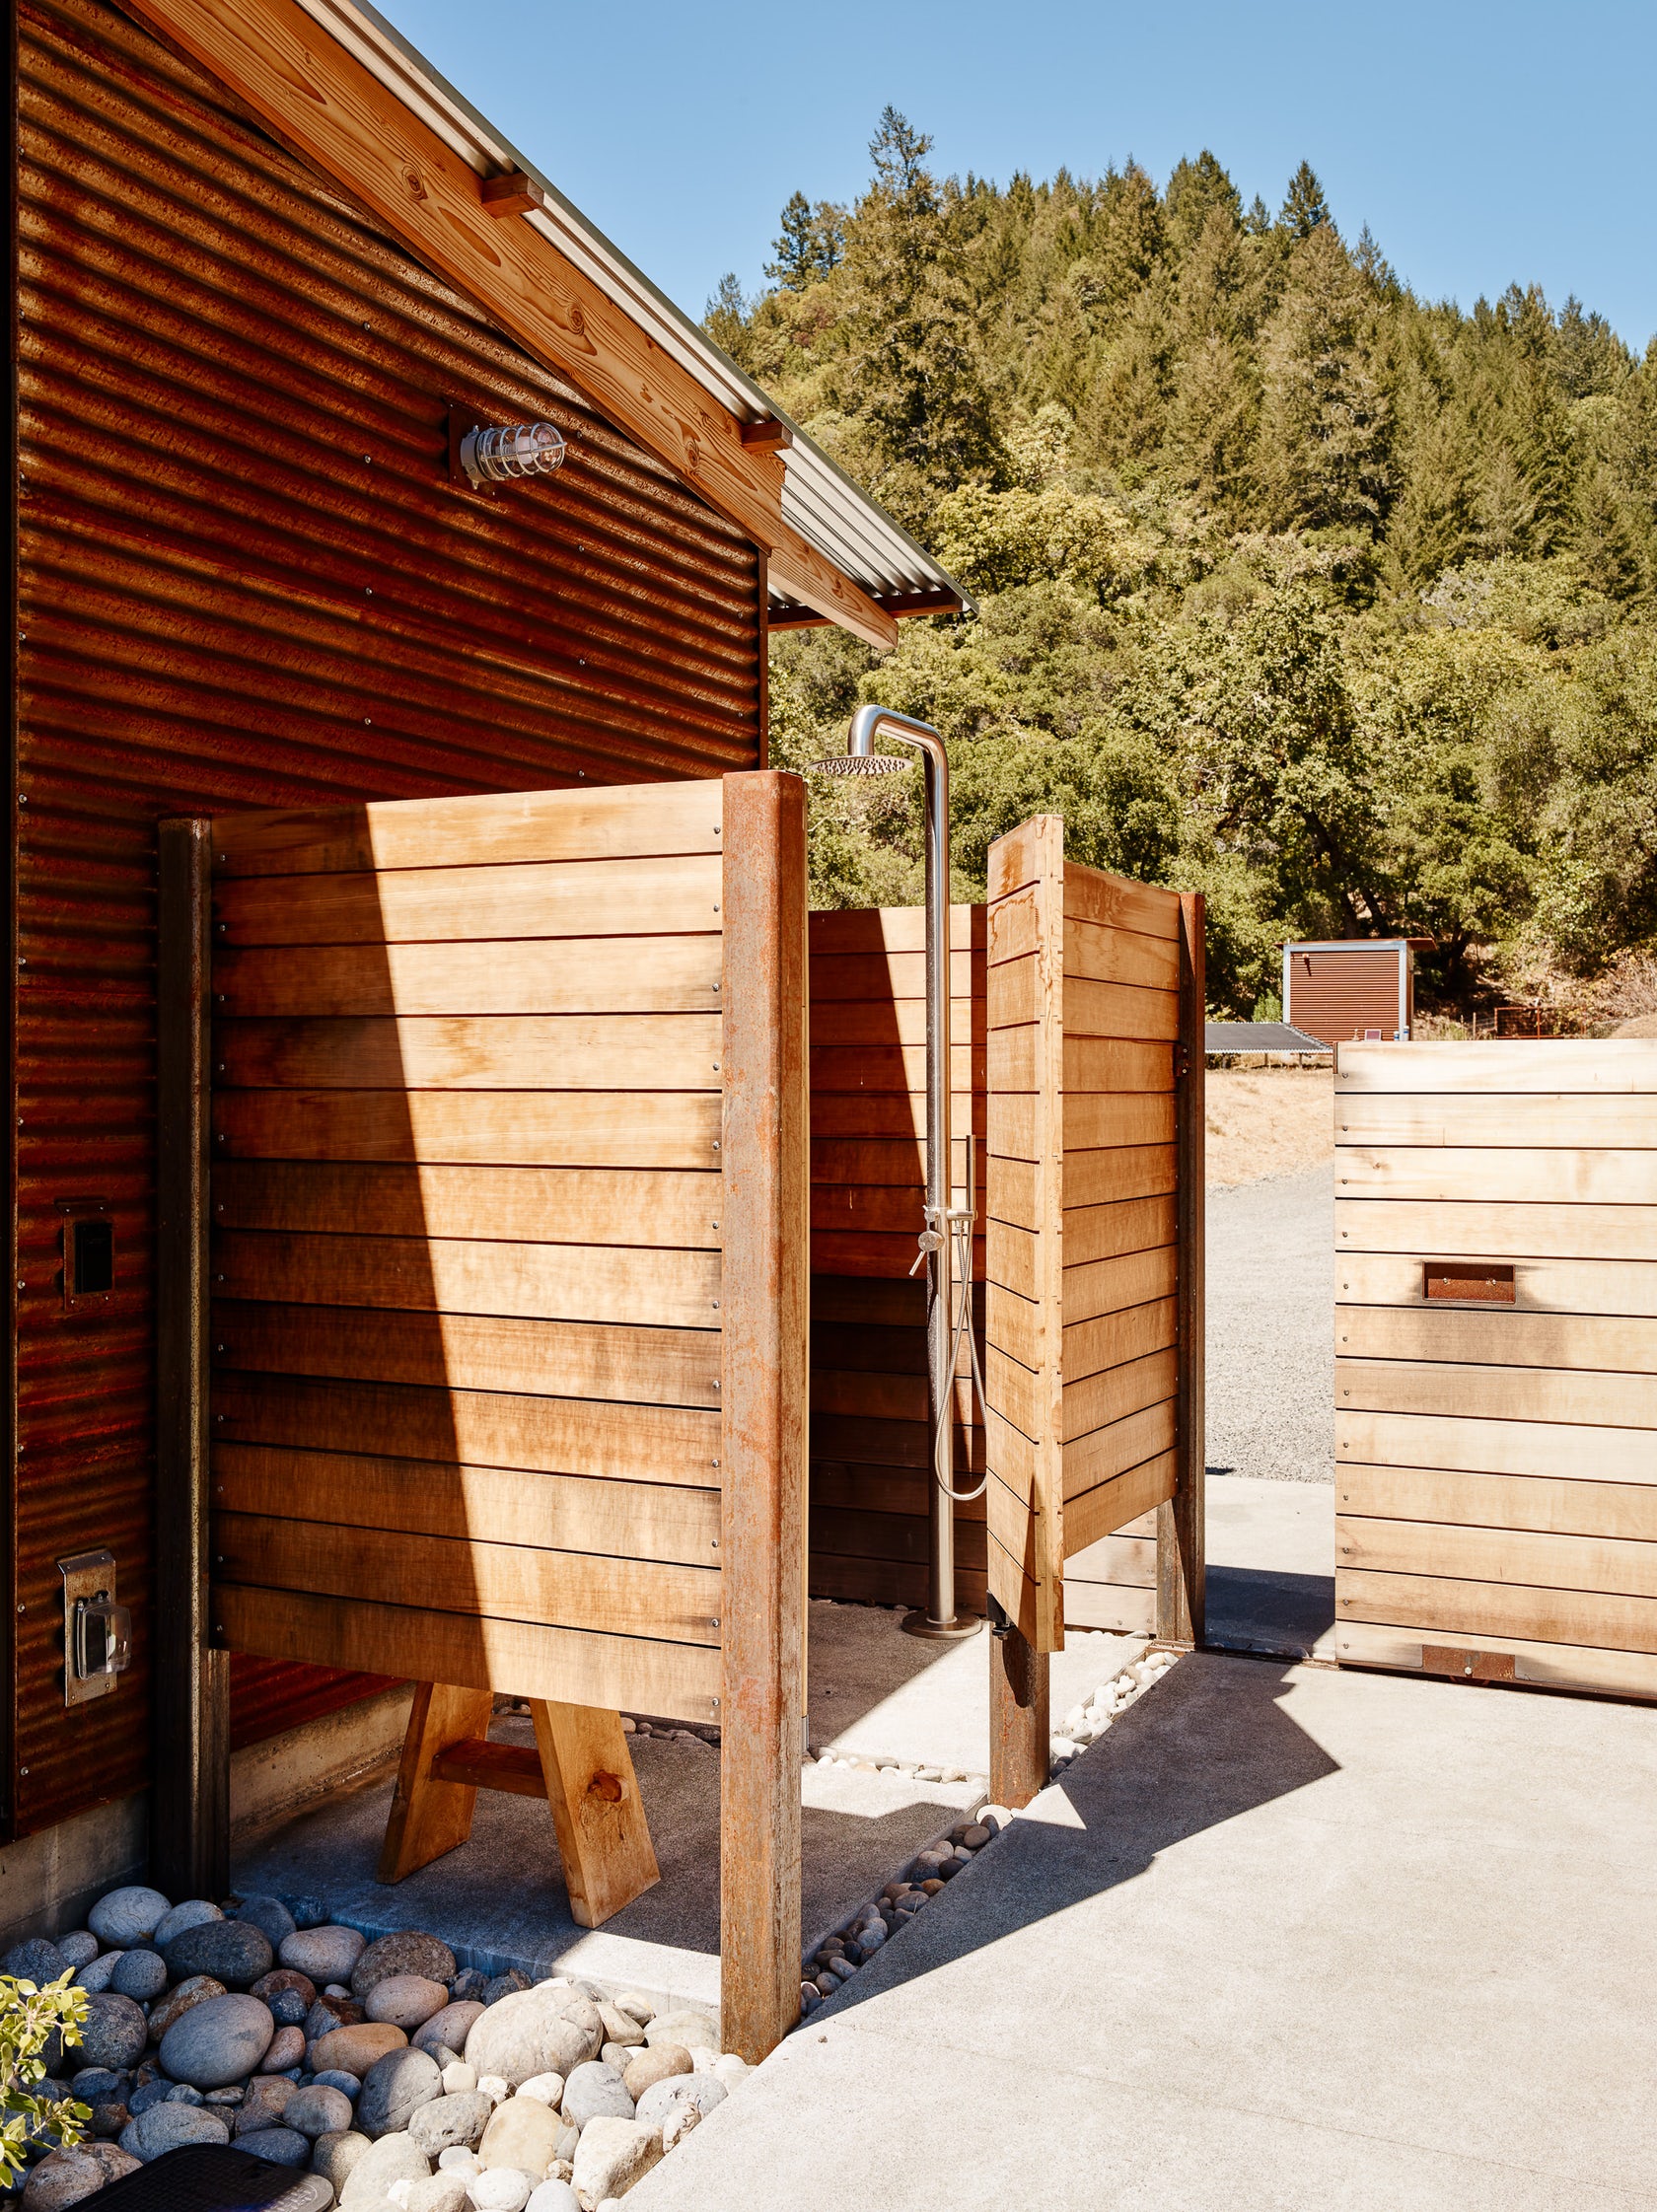 Make It Rain Designing The Perfect Outdoor Shower Architizer Journal